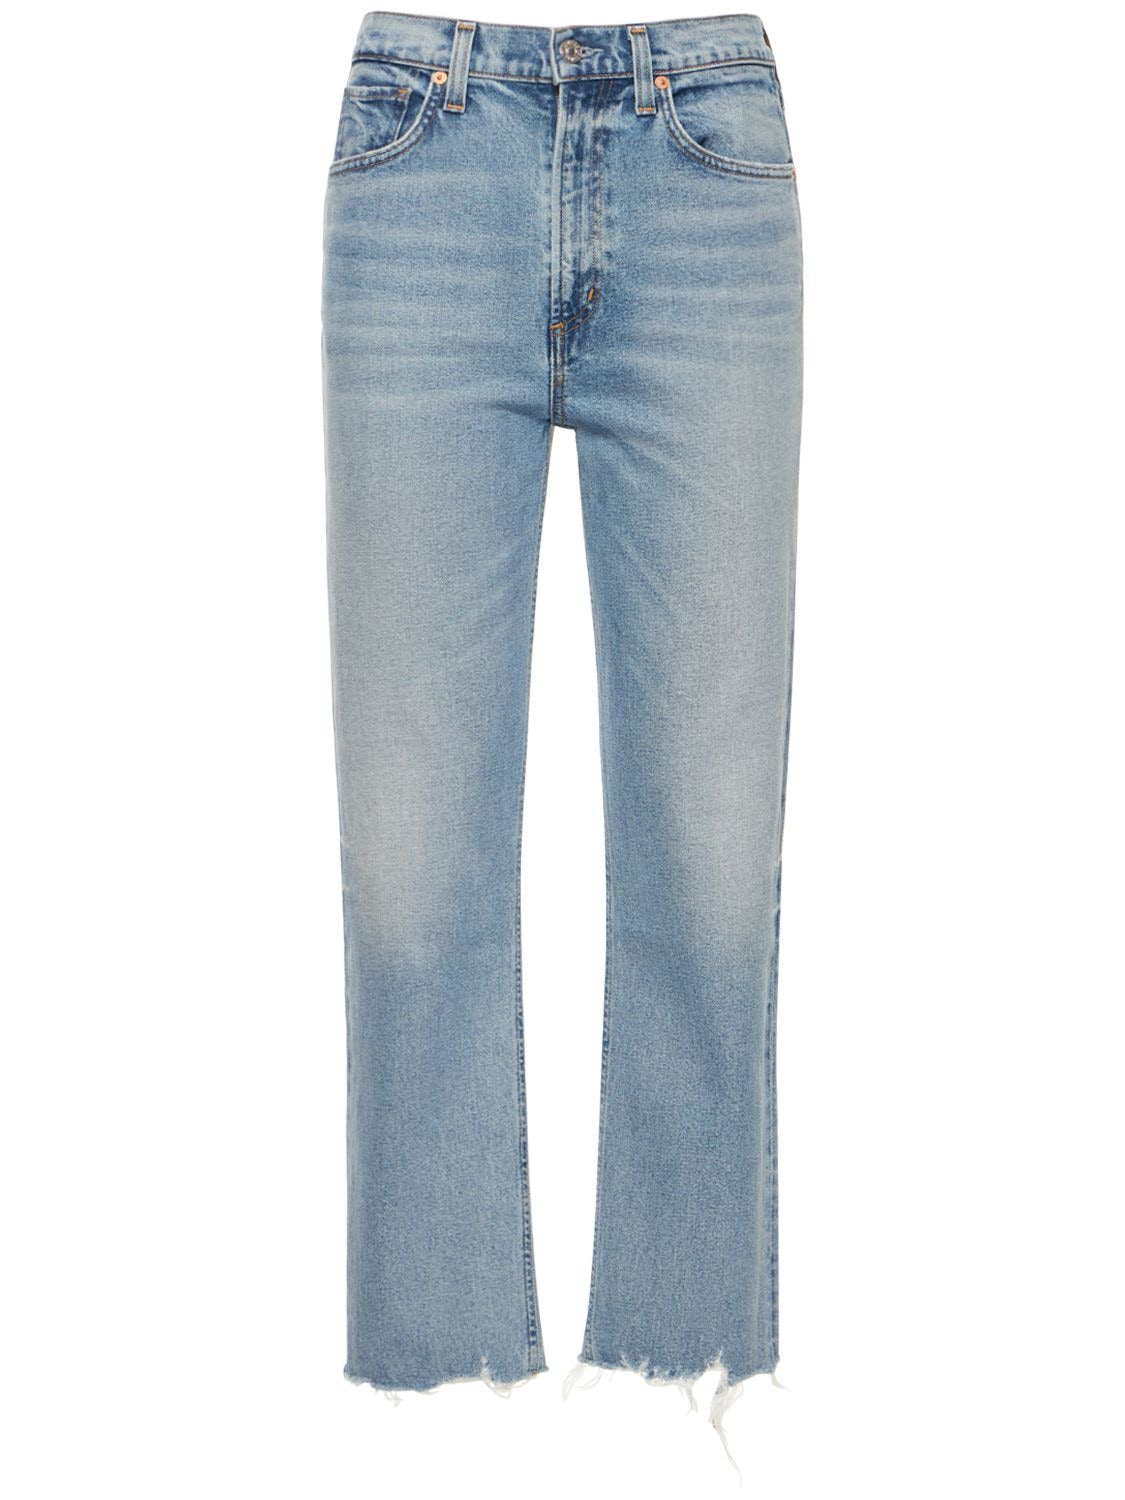 Daphne High Rise Cotton Stovepipe Jeans - CITIZENS OF HUMANITY - Modalova